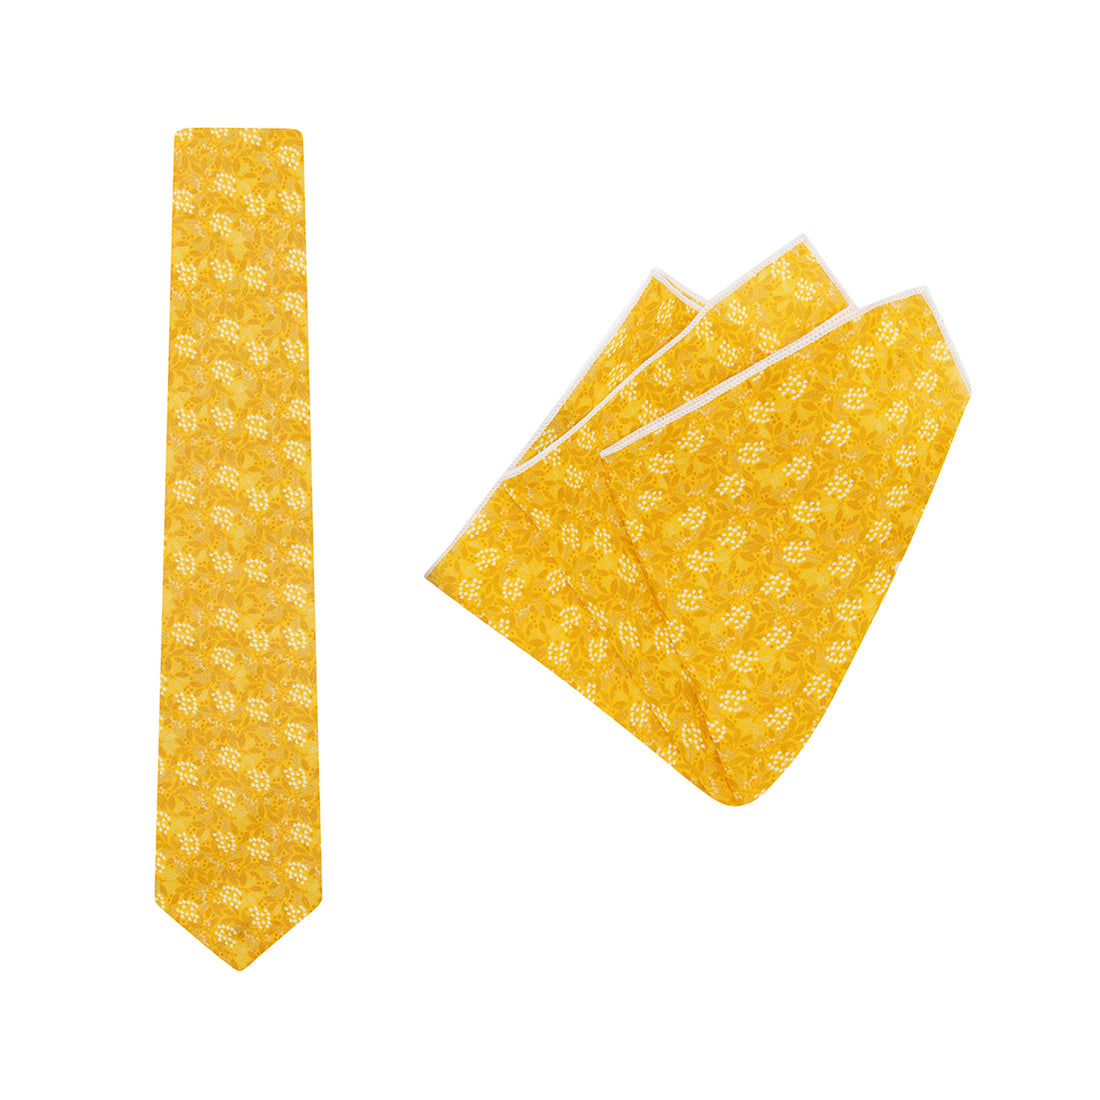 TIE + POCKET SQUARE SET. Jocelyn Proust Small Flower Print. Gold. Supplied with matching gold pocket square.-Ties-PEROZ Accessories